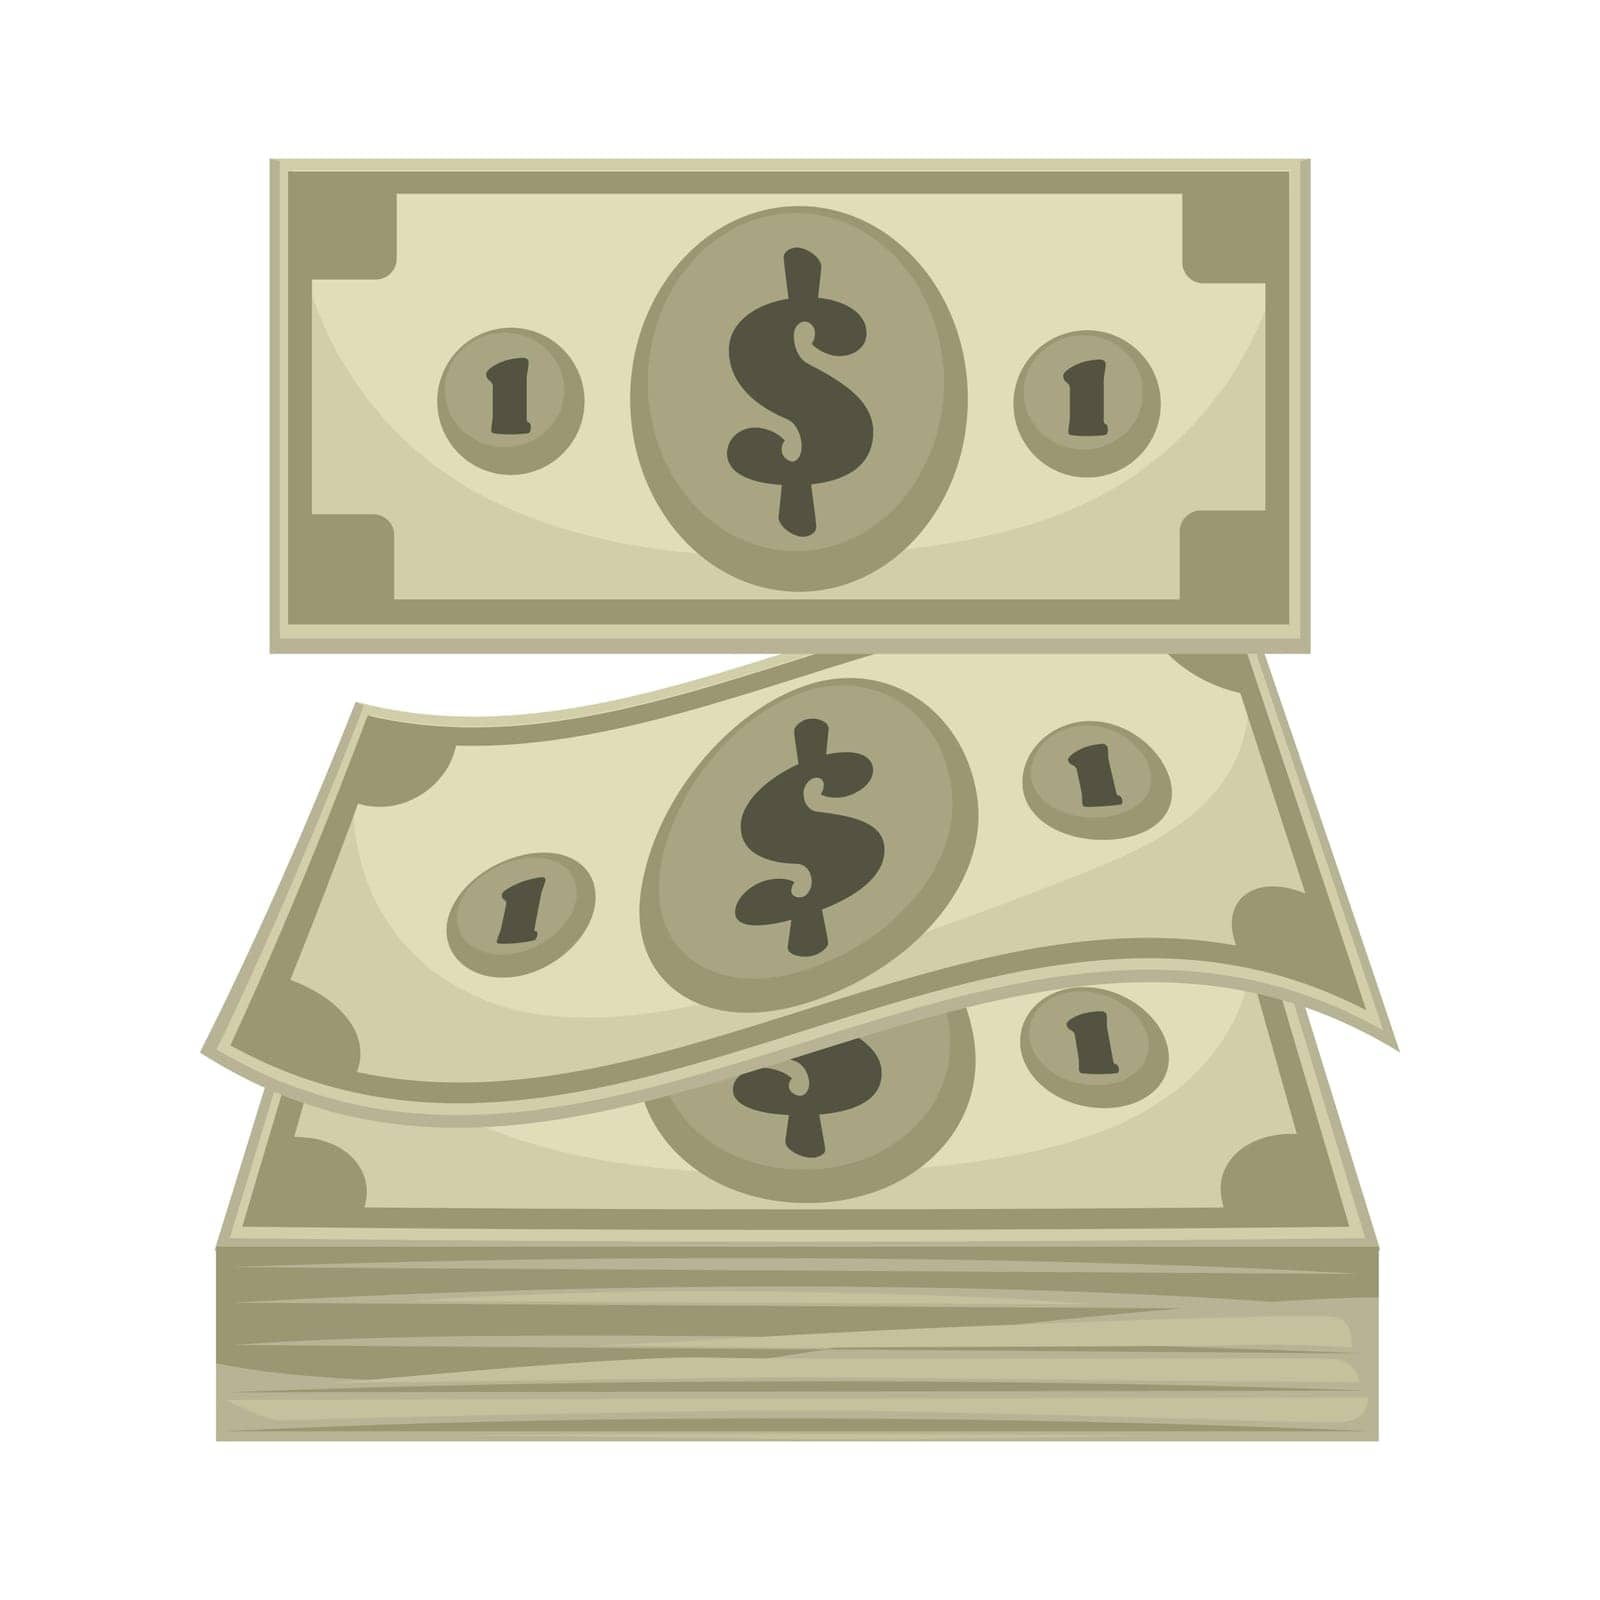 Us dollar banknotes, currency of united states of america. Isolated icon of cash, profit or earning money. Finances or investment, economy and wealth, prosperity and income, vector in flat style